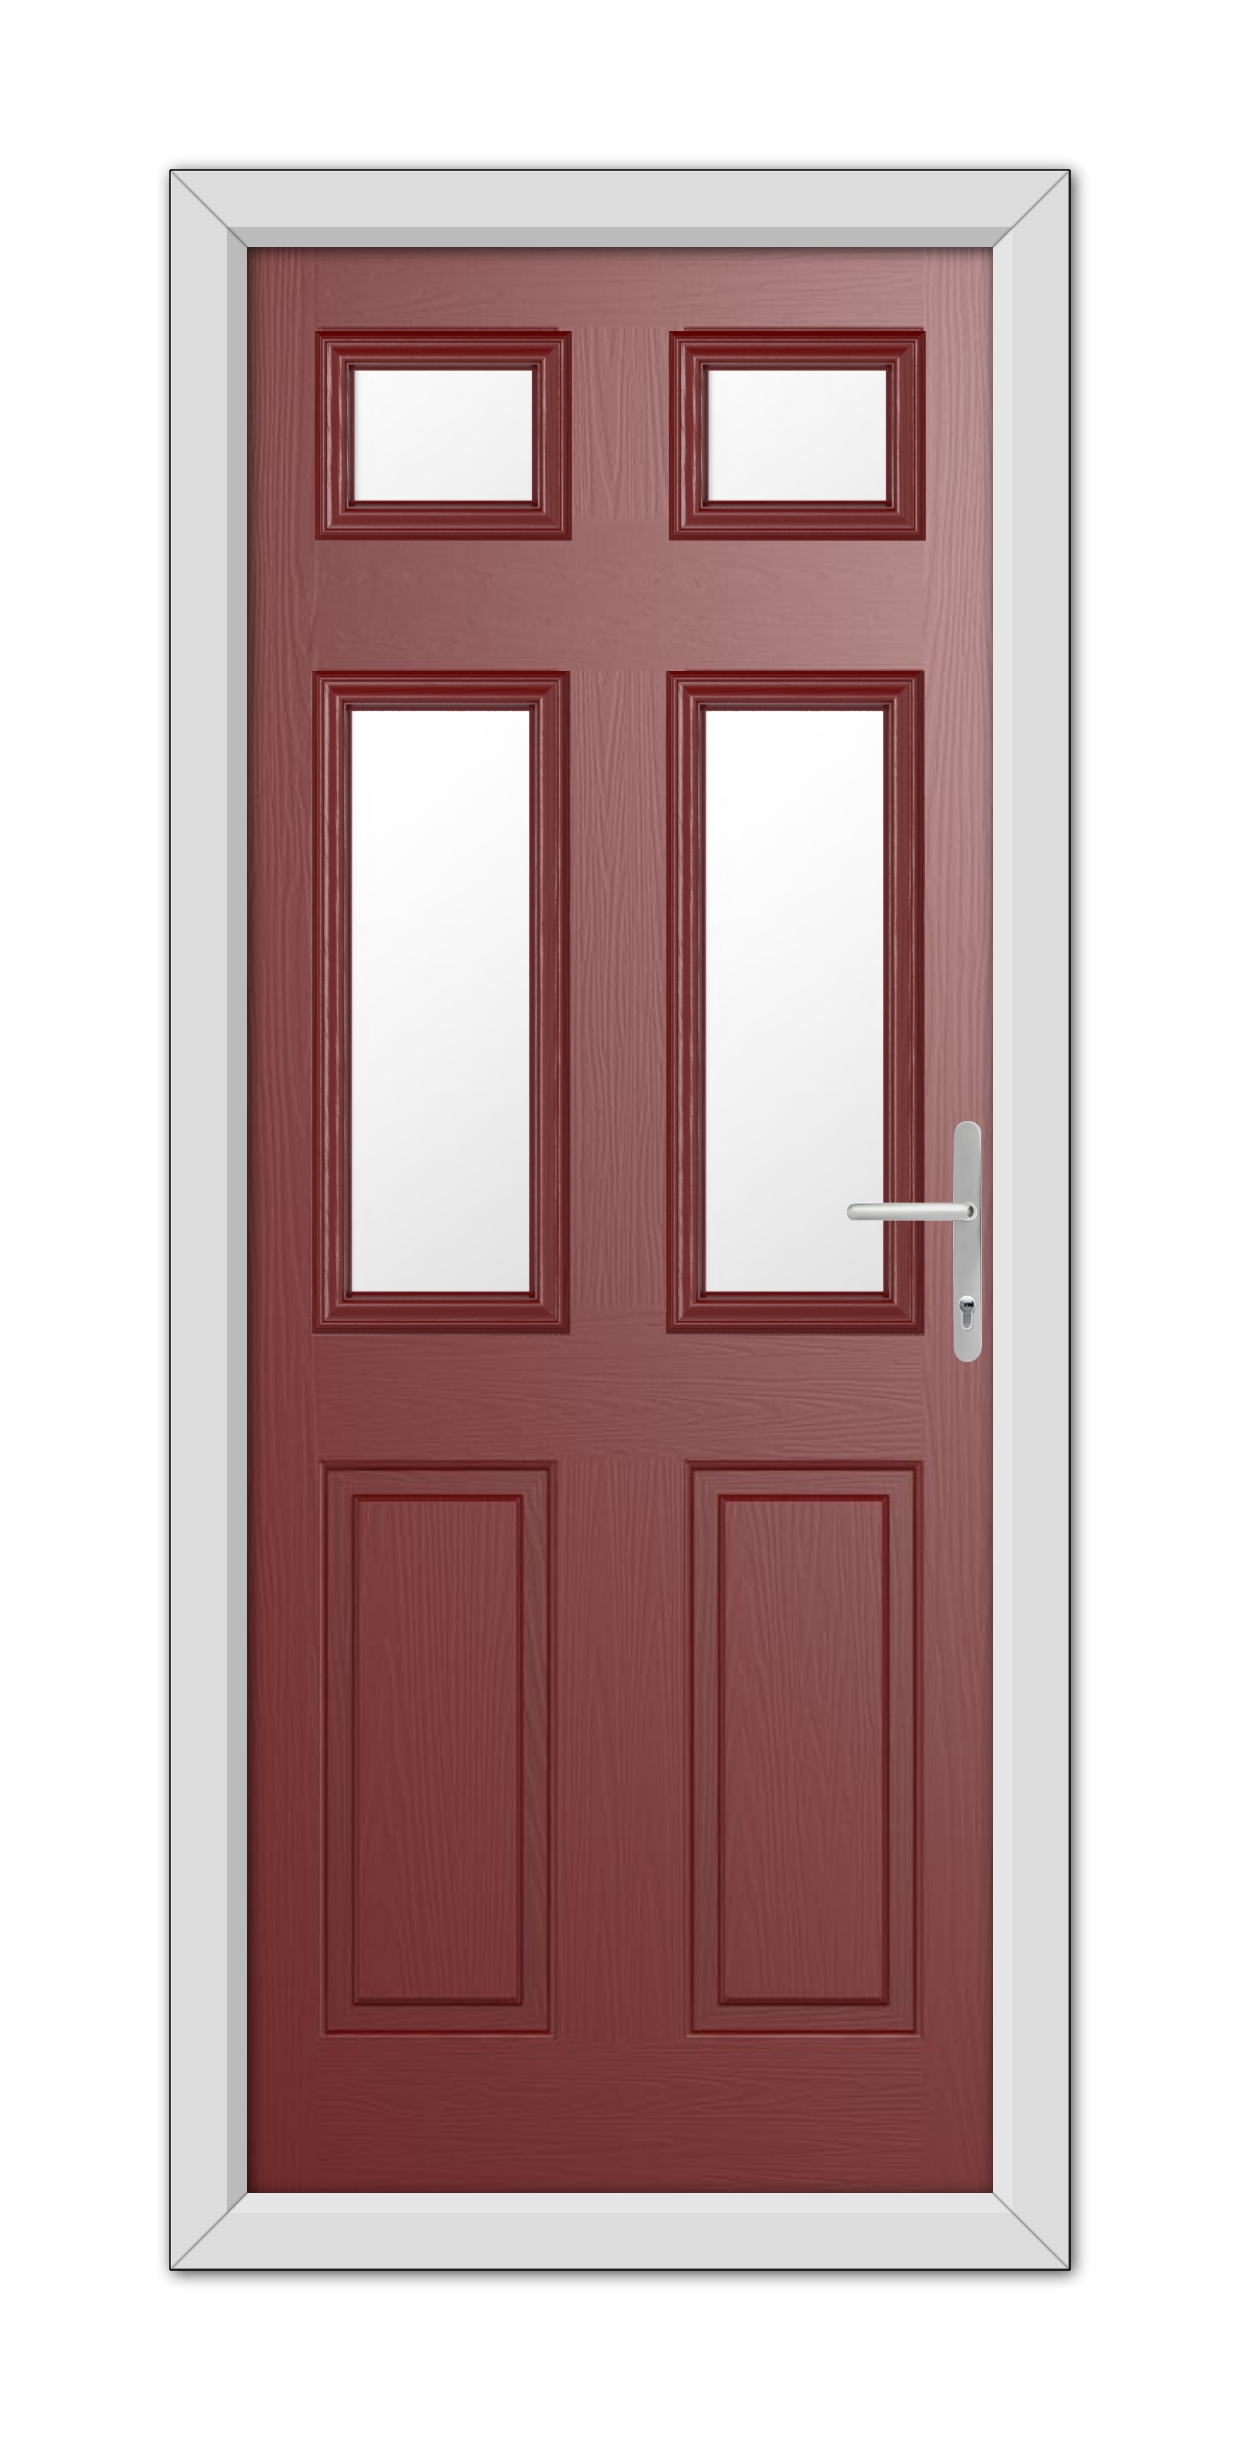 A modern Red Middleton Glazed 4 Composite Door with three glass panels on each door and a white handle on the right door, set in a white frame.